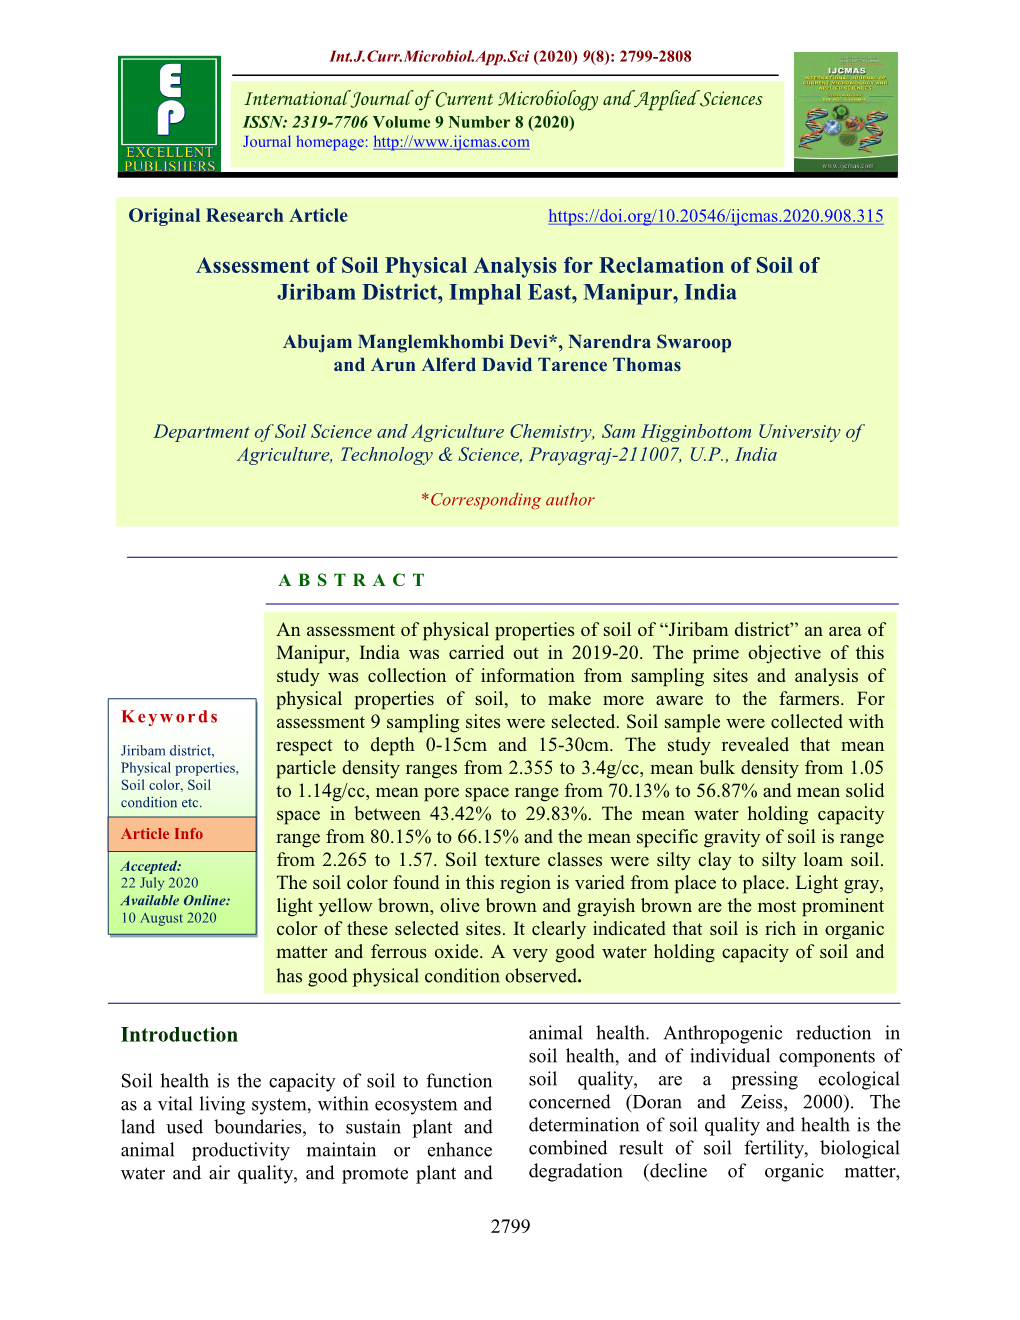 Assessment of Soil Physical Analysis for Reclamation of Soil of Jiribam District, Imphal East, Manipur, India